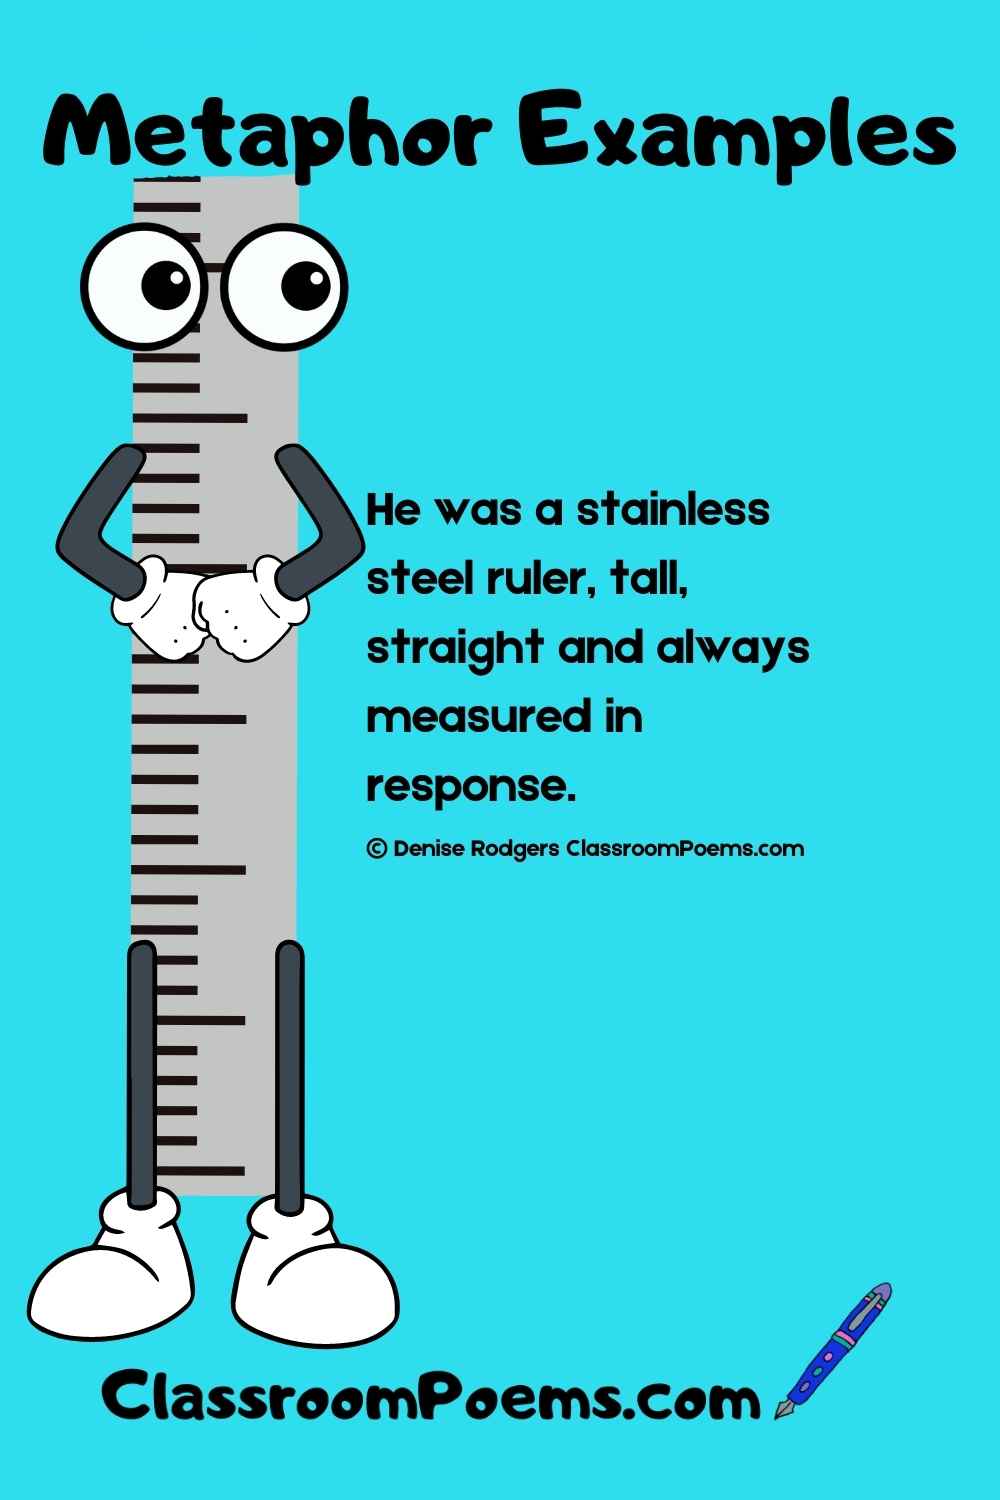 Steel ruler metaphor example by Denise Rodgers  on ClassroomPoems.com